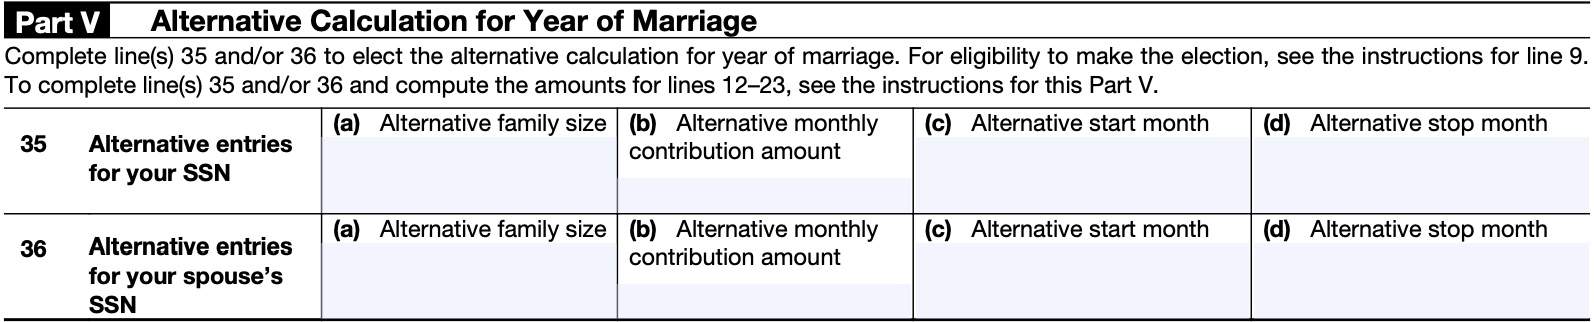 irs form 8962, part v: alternative calculation for year of marriage